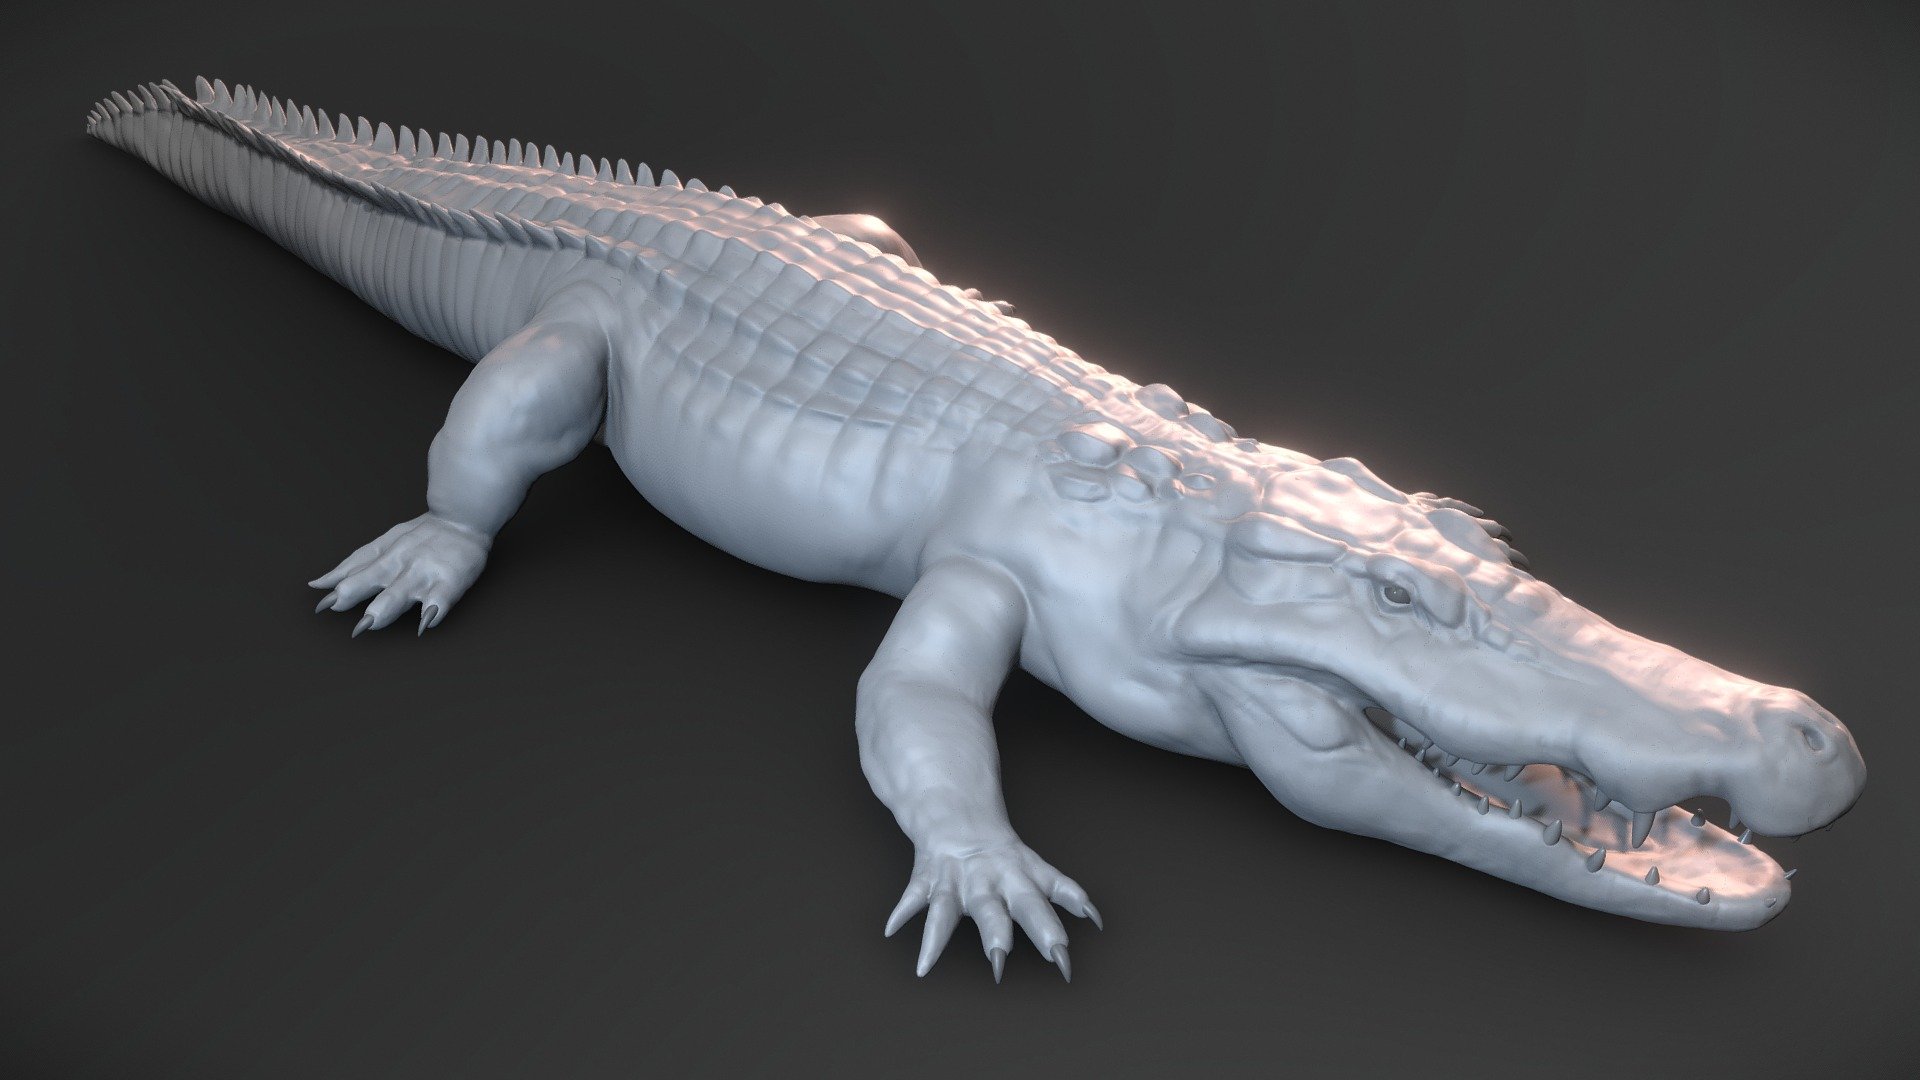 Need a crocodile model for your project? 

Save yourself a ton of time and hit the ground running with this crocodile basemesh, ready for further detailing and refinement. 

The model has correct scale, is symmetrical and centered properly in the scene. Zbrush file also includes predefined polygroups which can be useful for detailing and zremeshing (use Zremesher-option &lsquo;KeepGroups' and remeshing will maintain polygroup borders).

Please note: This is not a finished model, but rather a sculpted basemesh where the primary and secondary sculpting is done, saving you multiple work hours. The final detailing, retopology, uvs and texturing is up to you, depending on the needs and requirements of your project 3d model